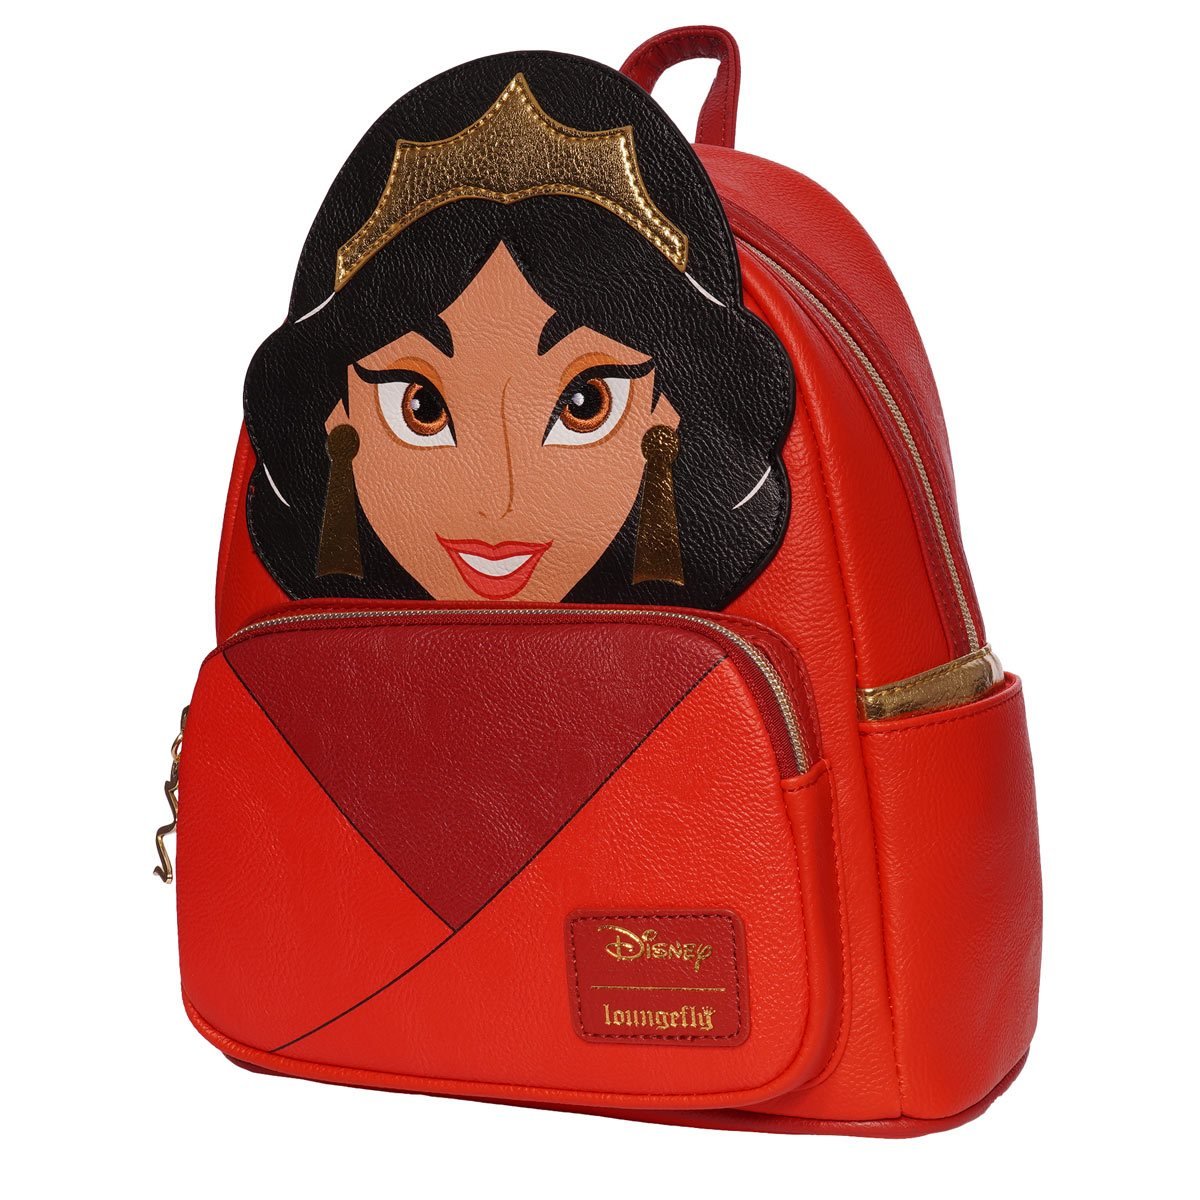 Loungefly Disney Aladdin Jasmine Red Cosplay Mini Backpack - Entertainment Earth Ex - Alternate Side View